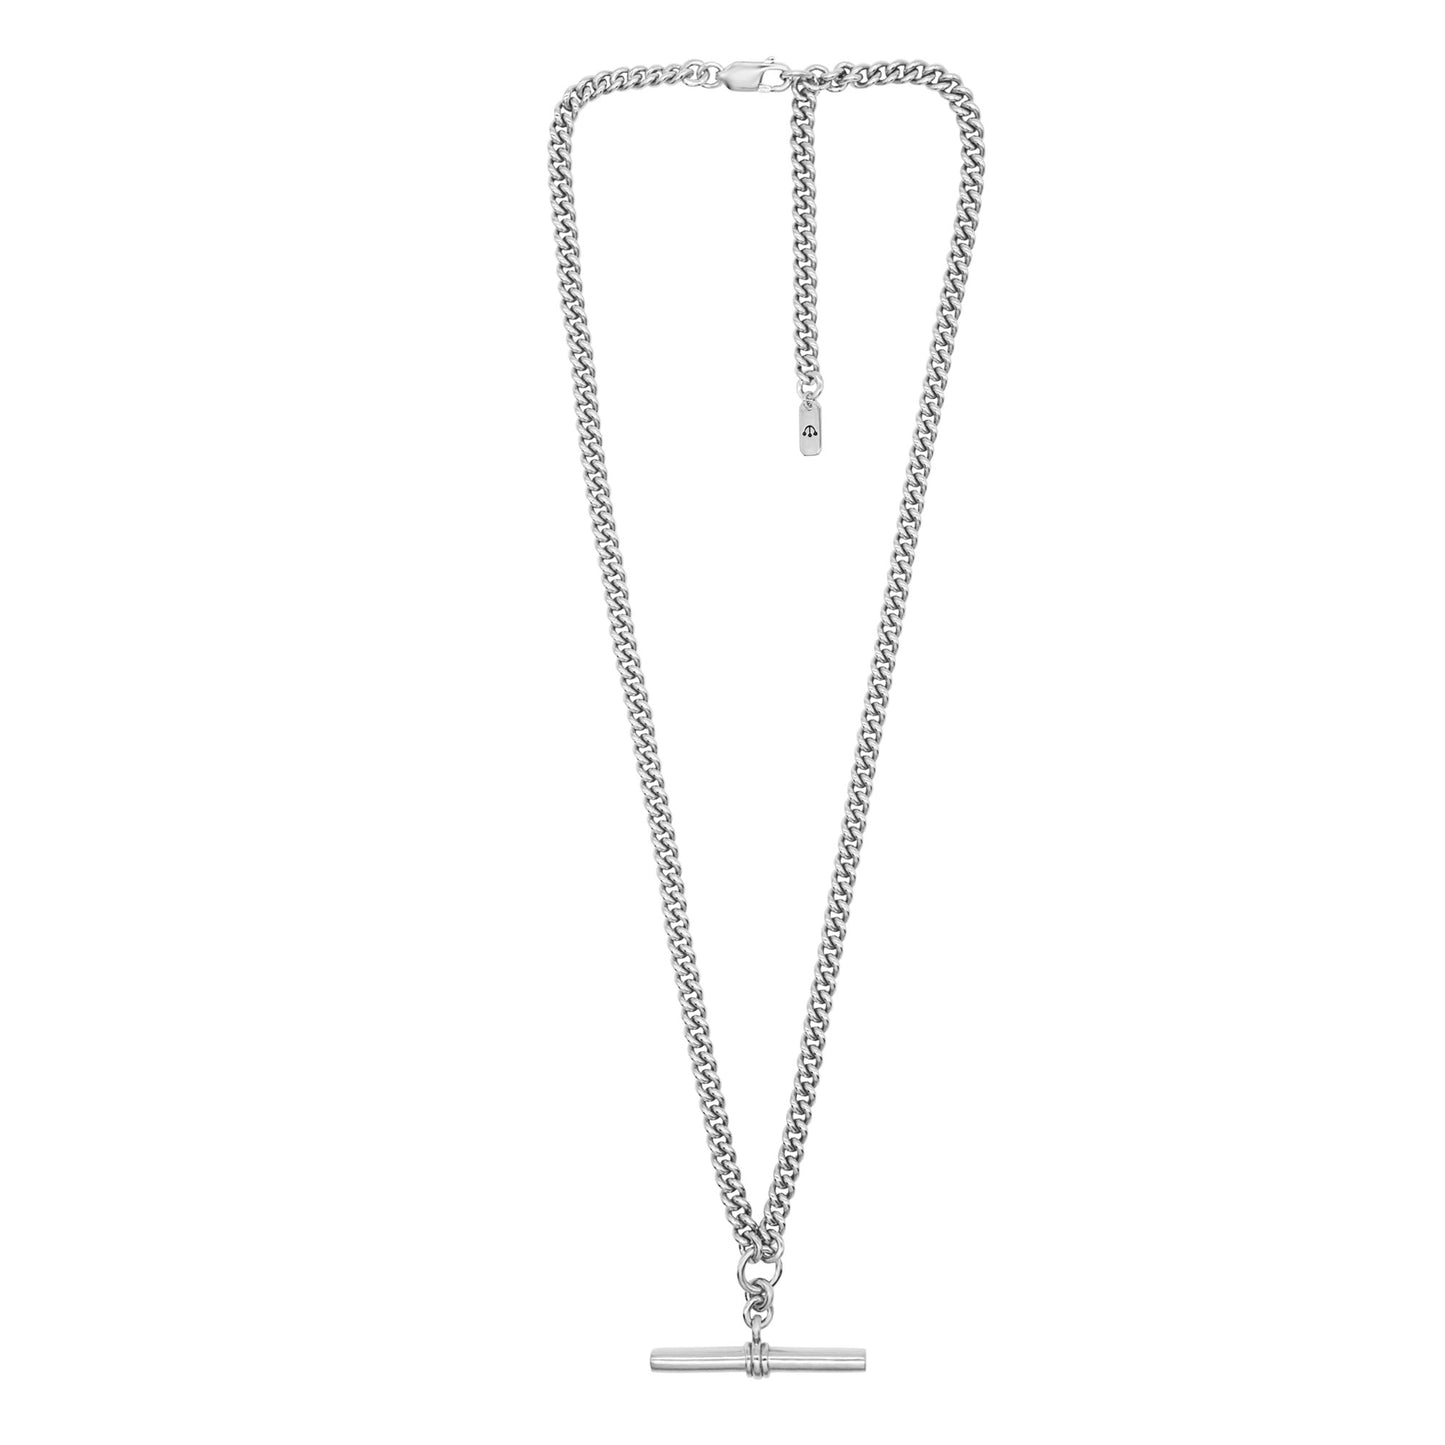 Photograph of Pawnshop sterling silver T bar necklace. Curb chain detail with a T bar charm feature.